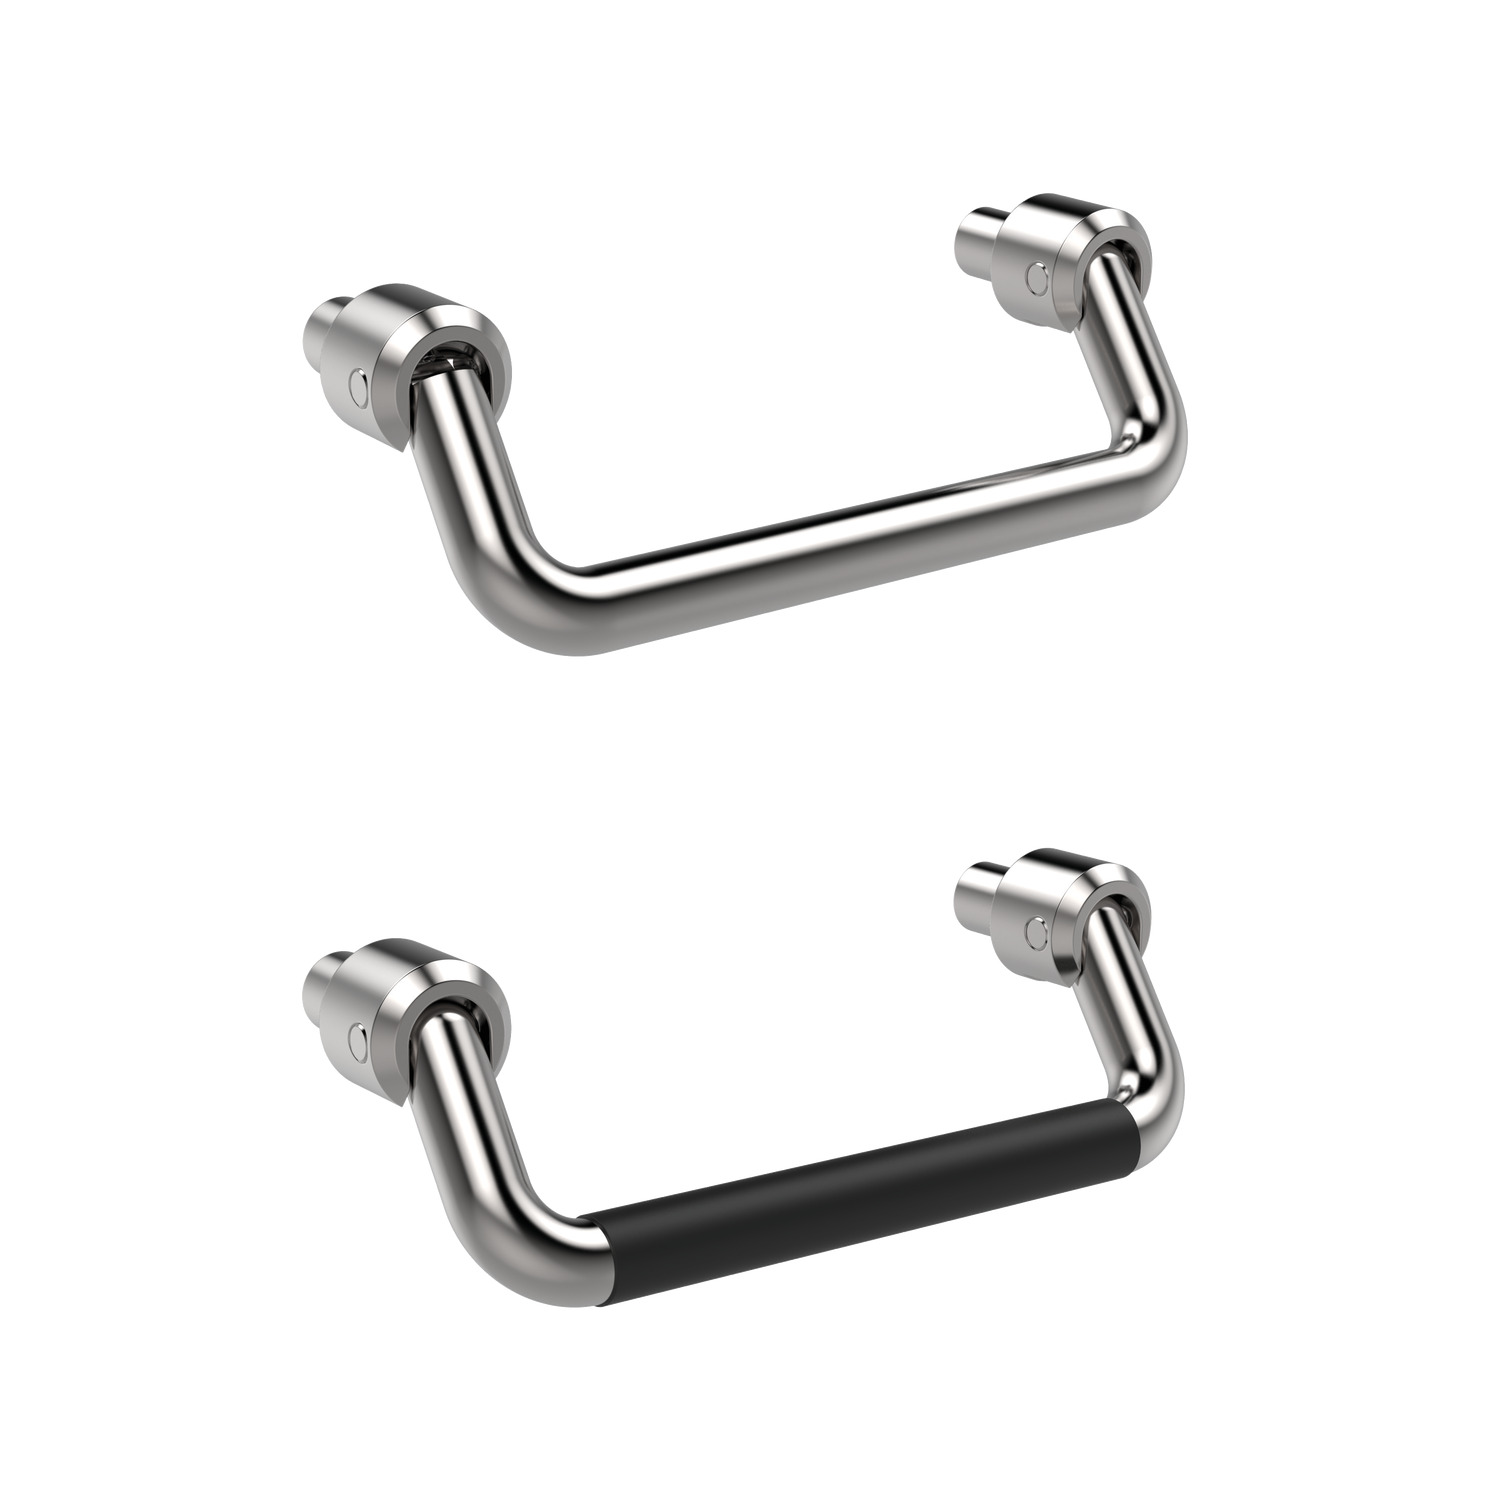 79570 - Pull Handles, Collapsible